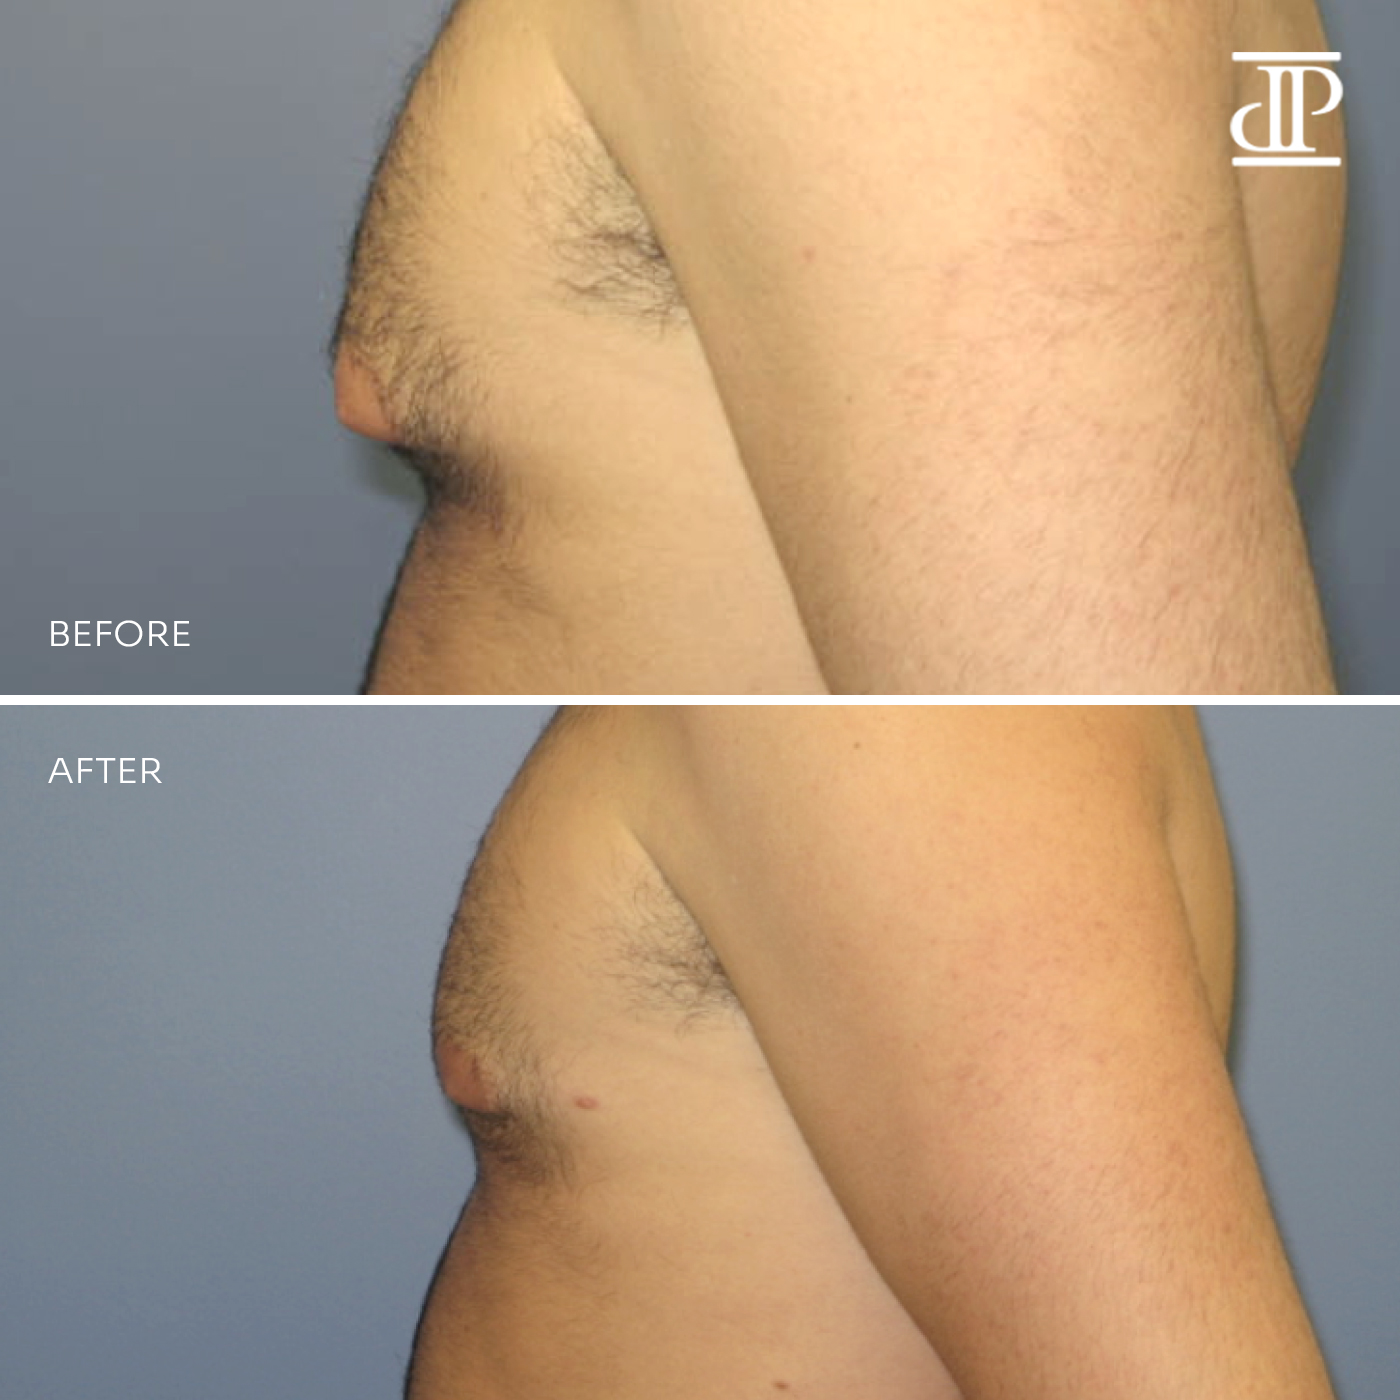 Breast Lift with Reduction West Island, Montreal - Plastic Surgery